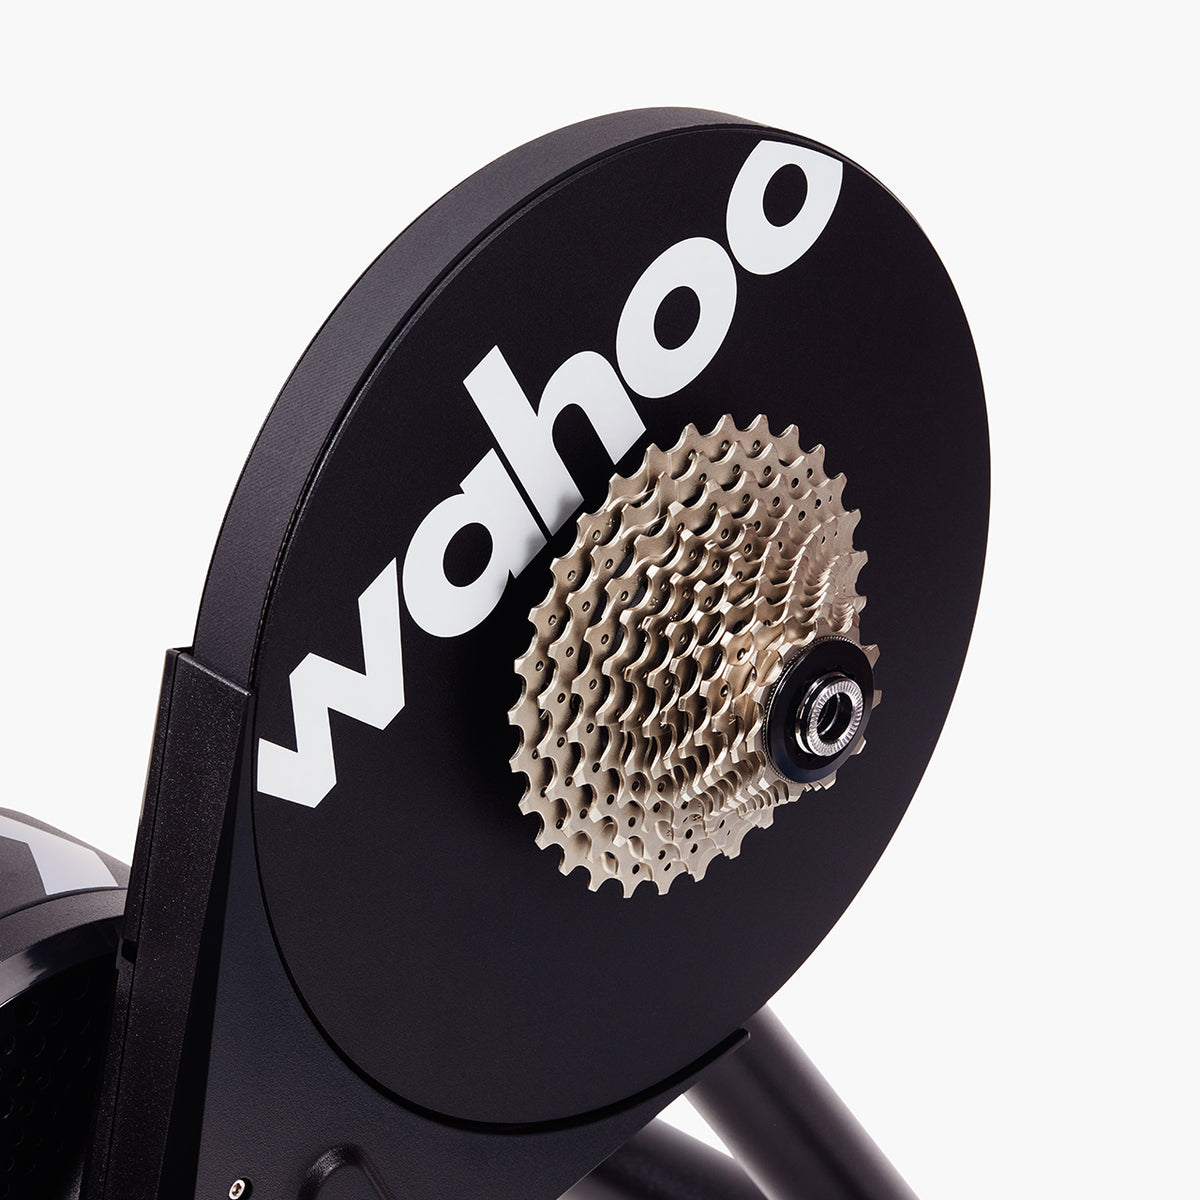 Wahoo KICKR CORE with 12-speed cassette